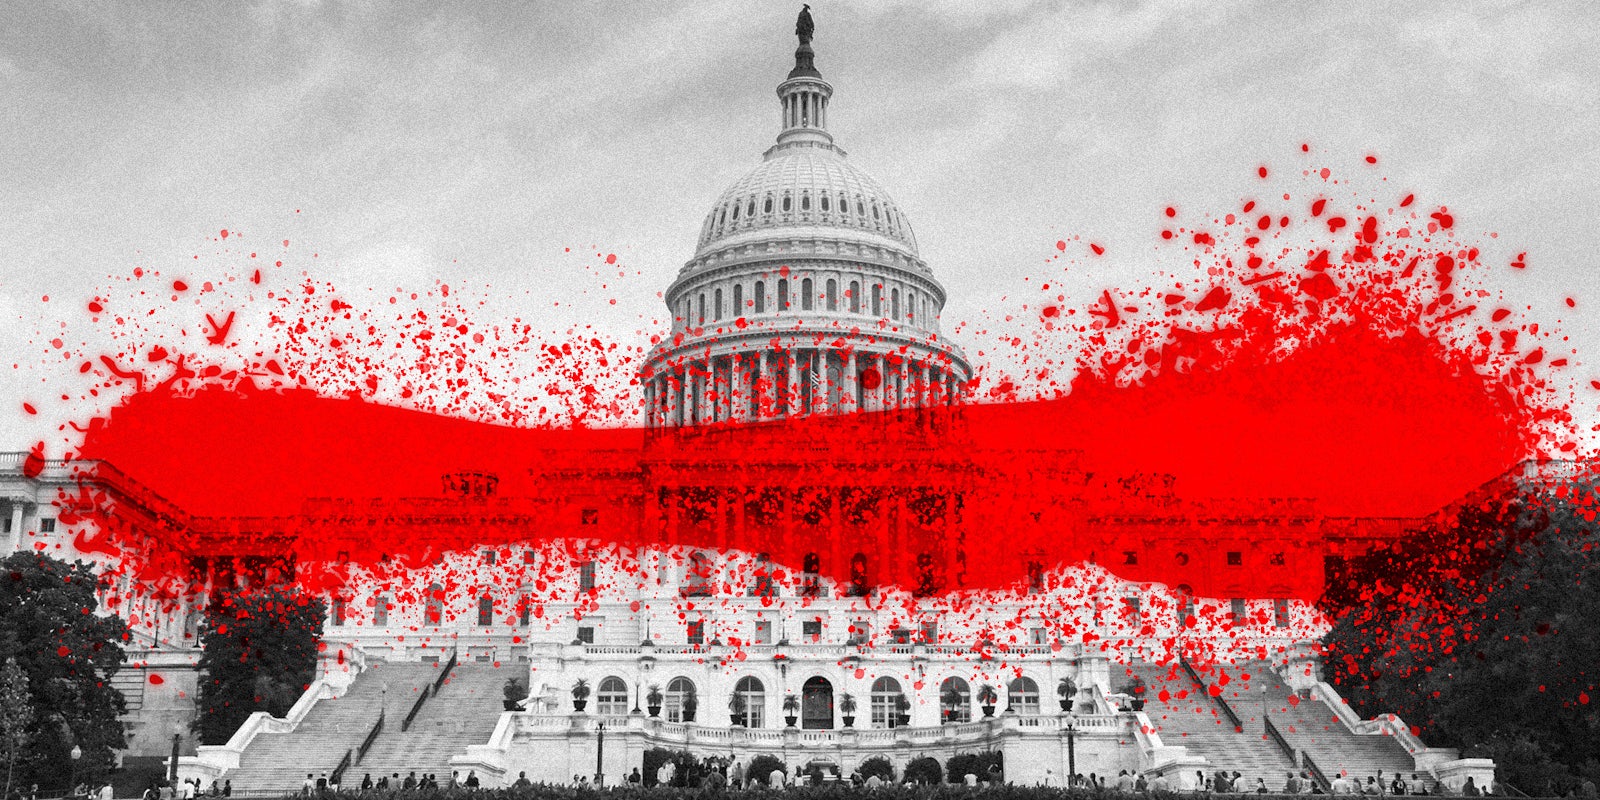 Capitol building with splash of red paint across the image